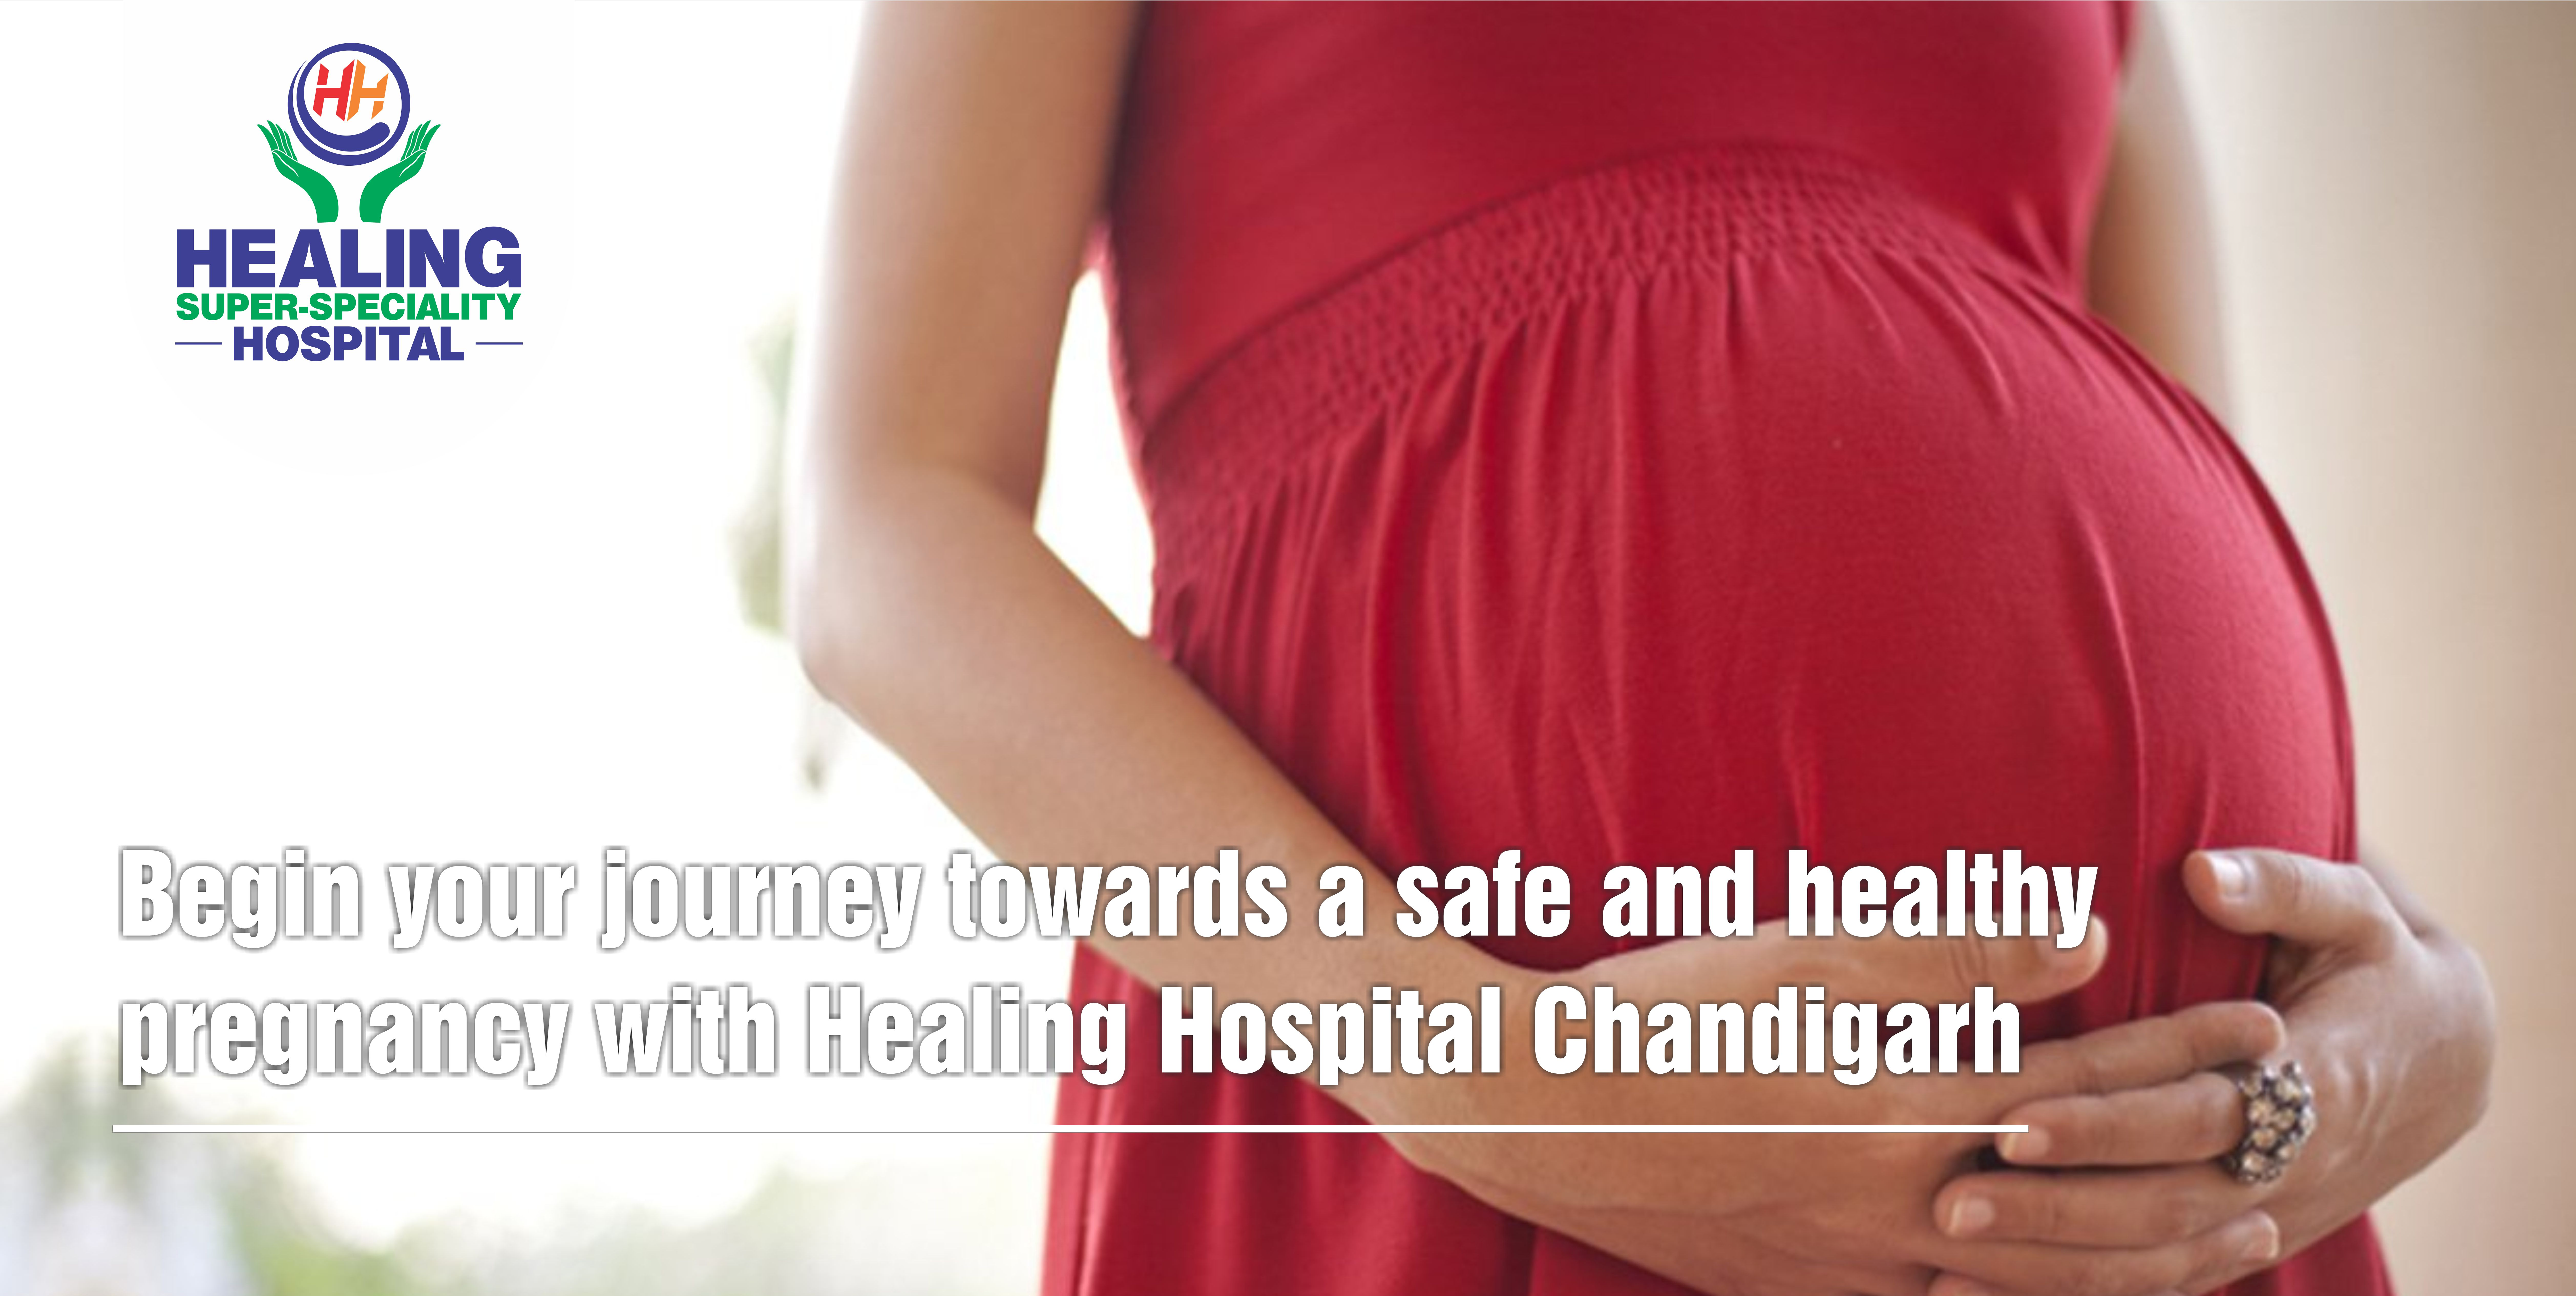 Begin your journey towards a safe and healthy pregnancy with Healing Hospital Chandigarh